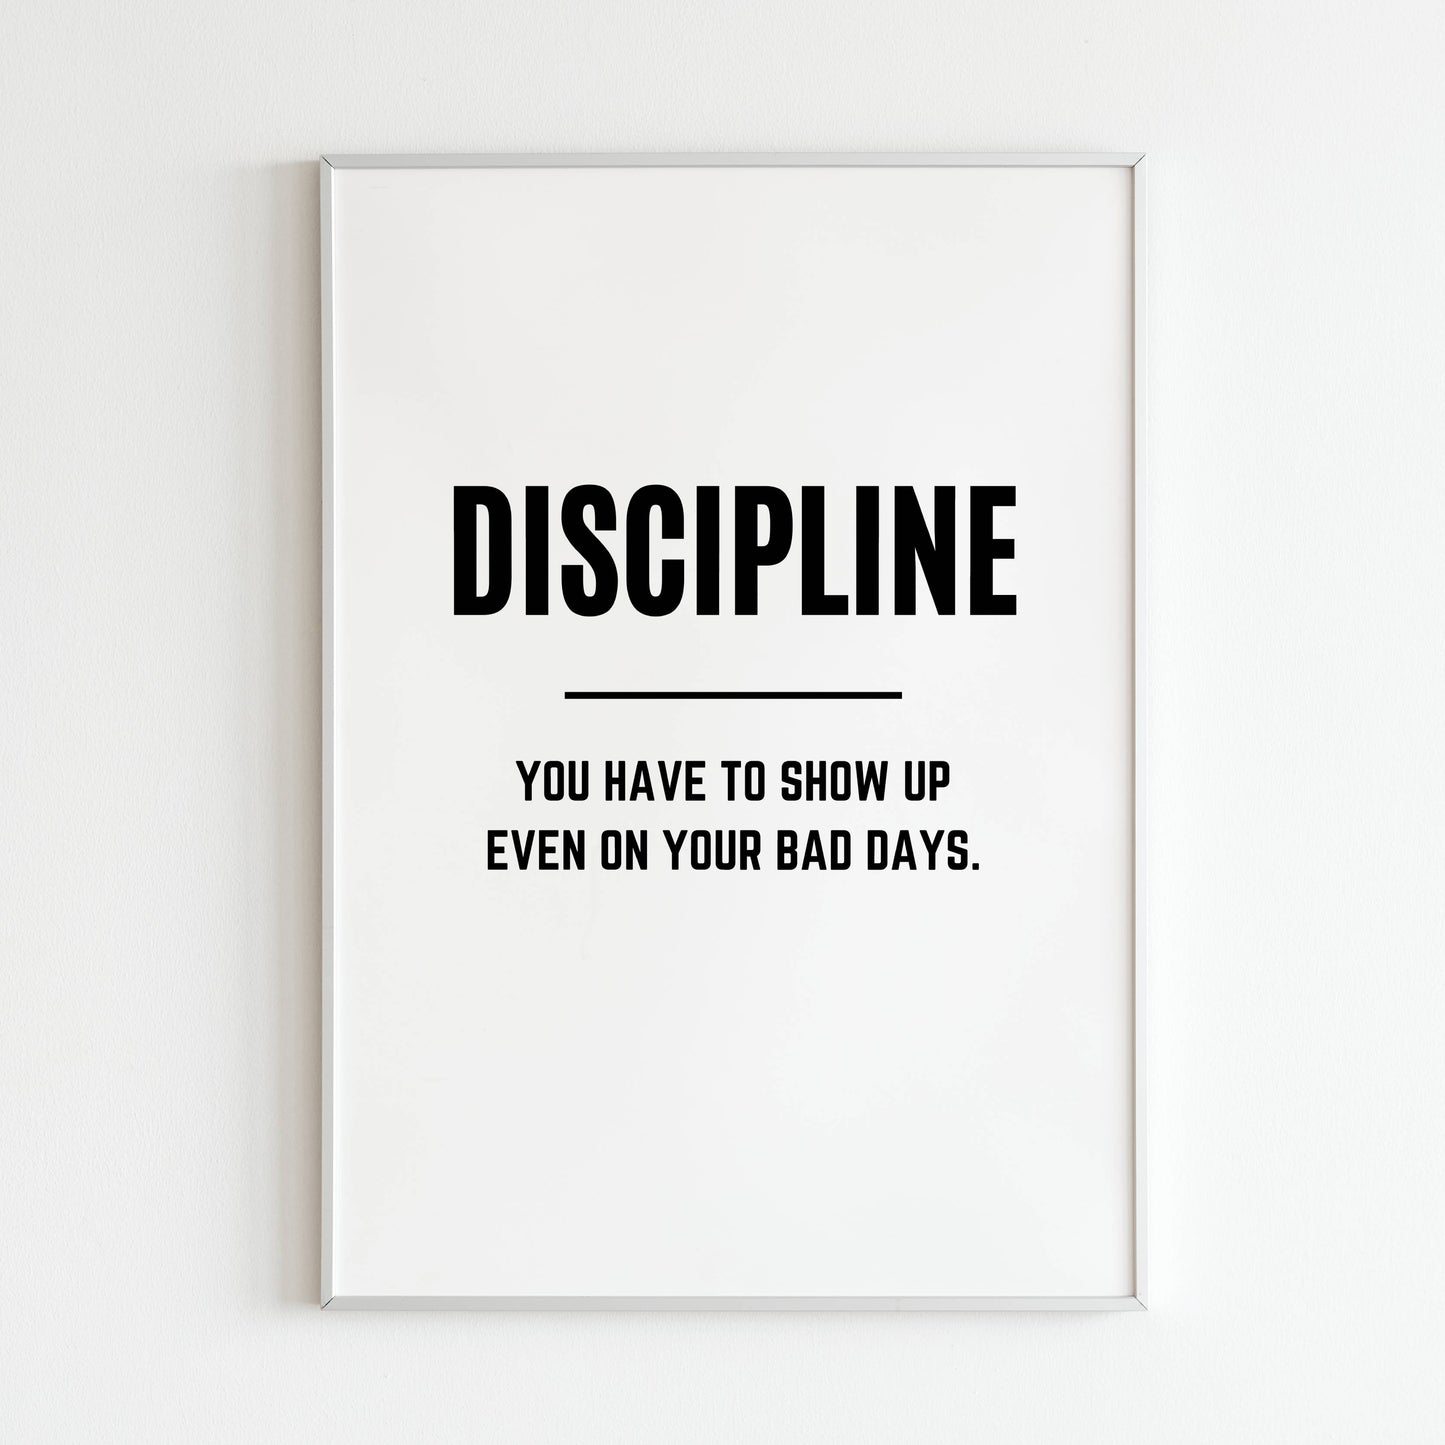 Printable discipline poster - Minimalist typography art with a message of self-control.